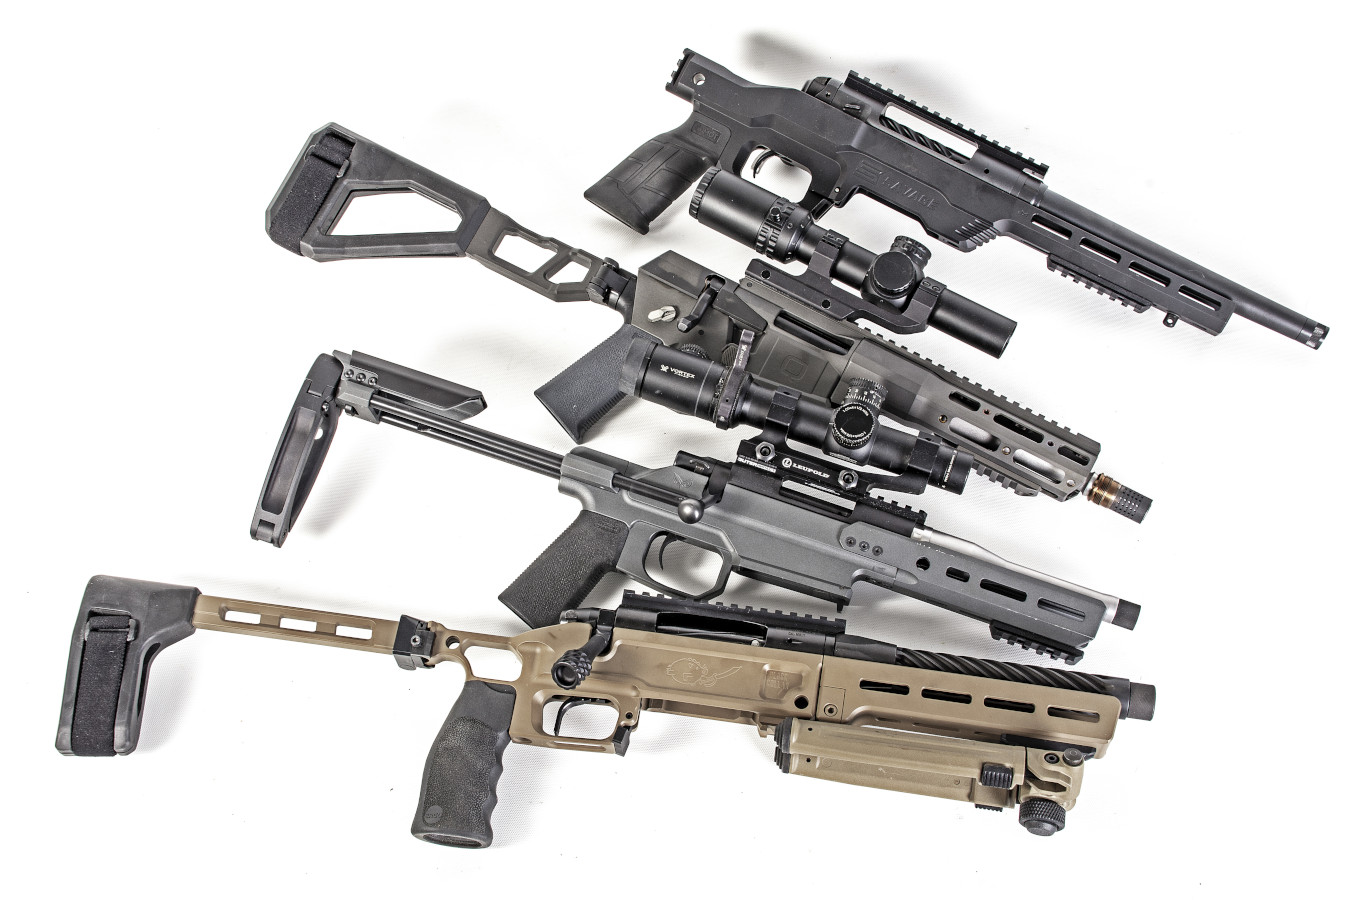 WEAPONS - RD-9 / RD-10 / RD-45 / RD-300BLK / RD-556 - Tactical